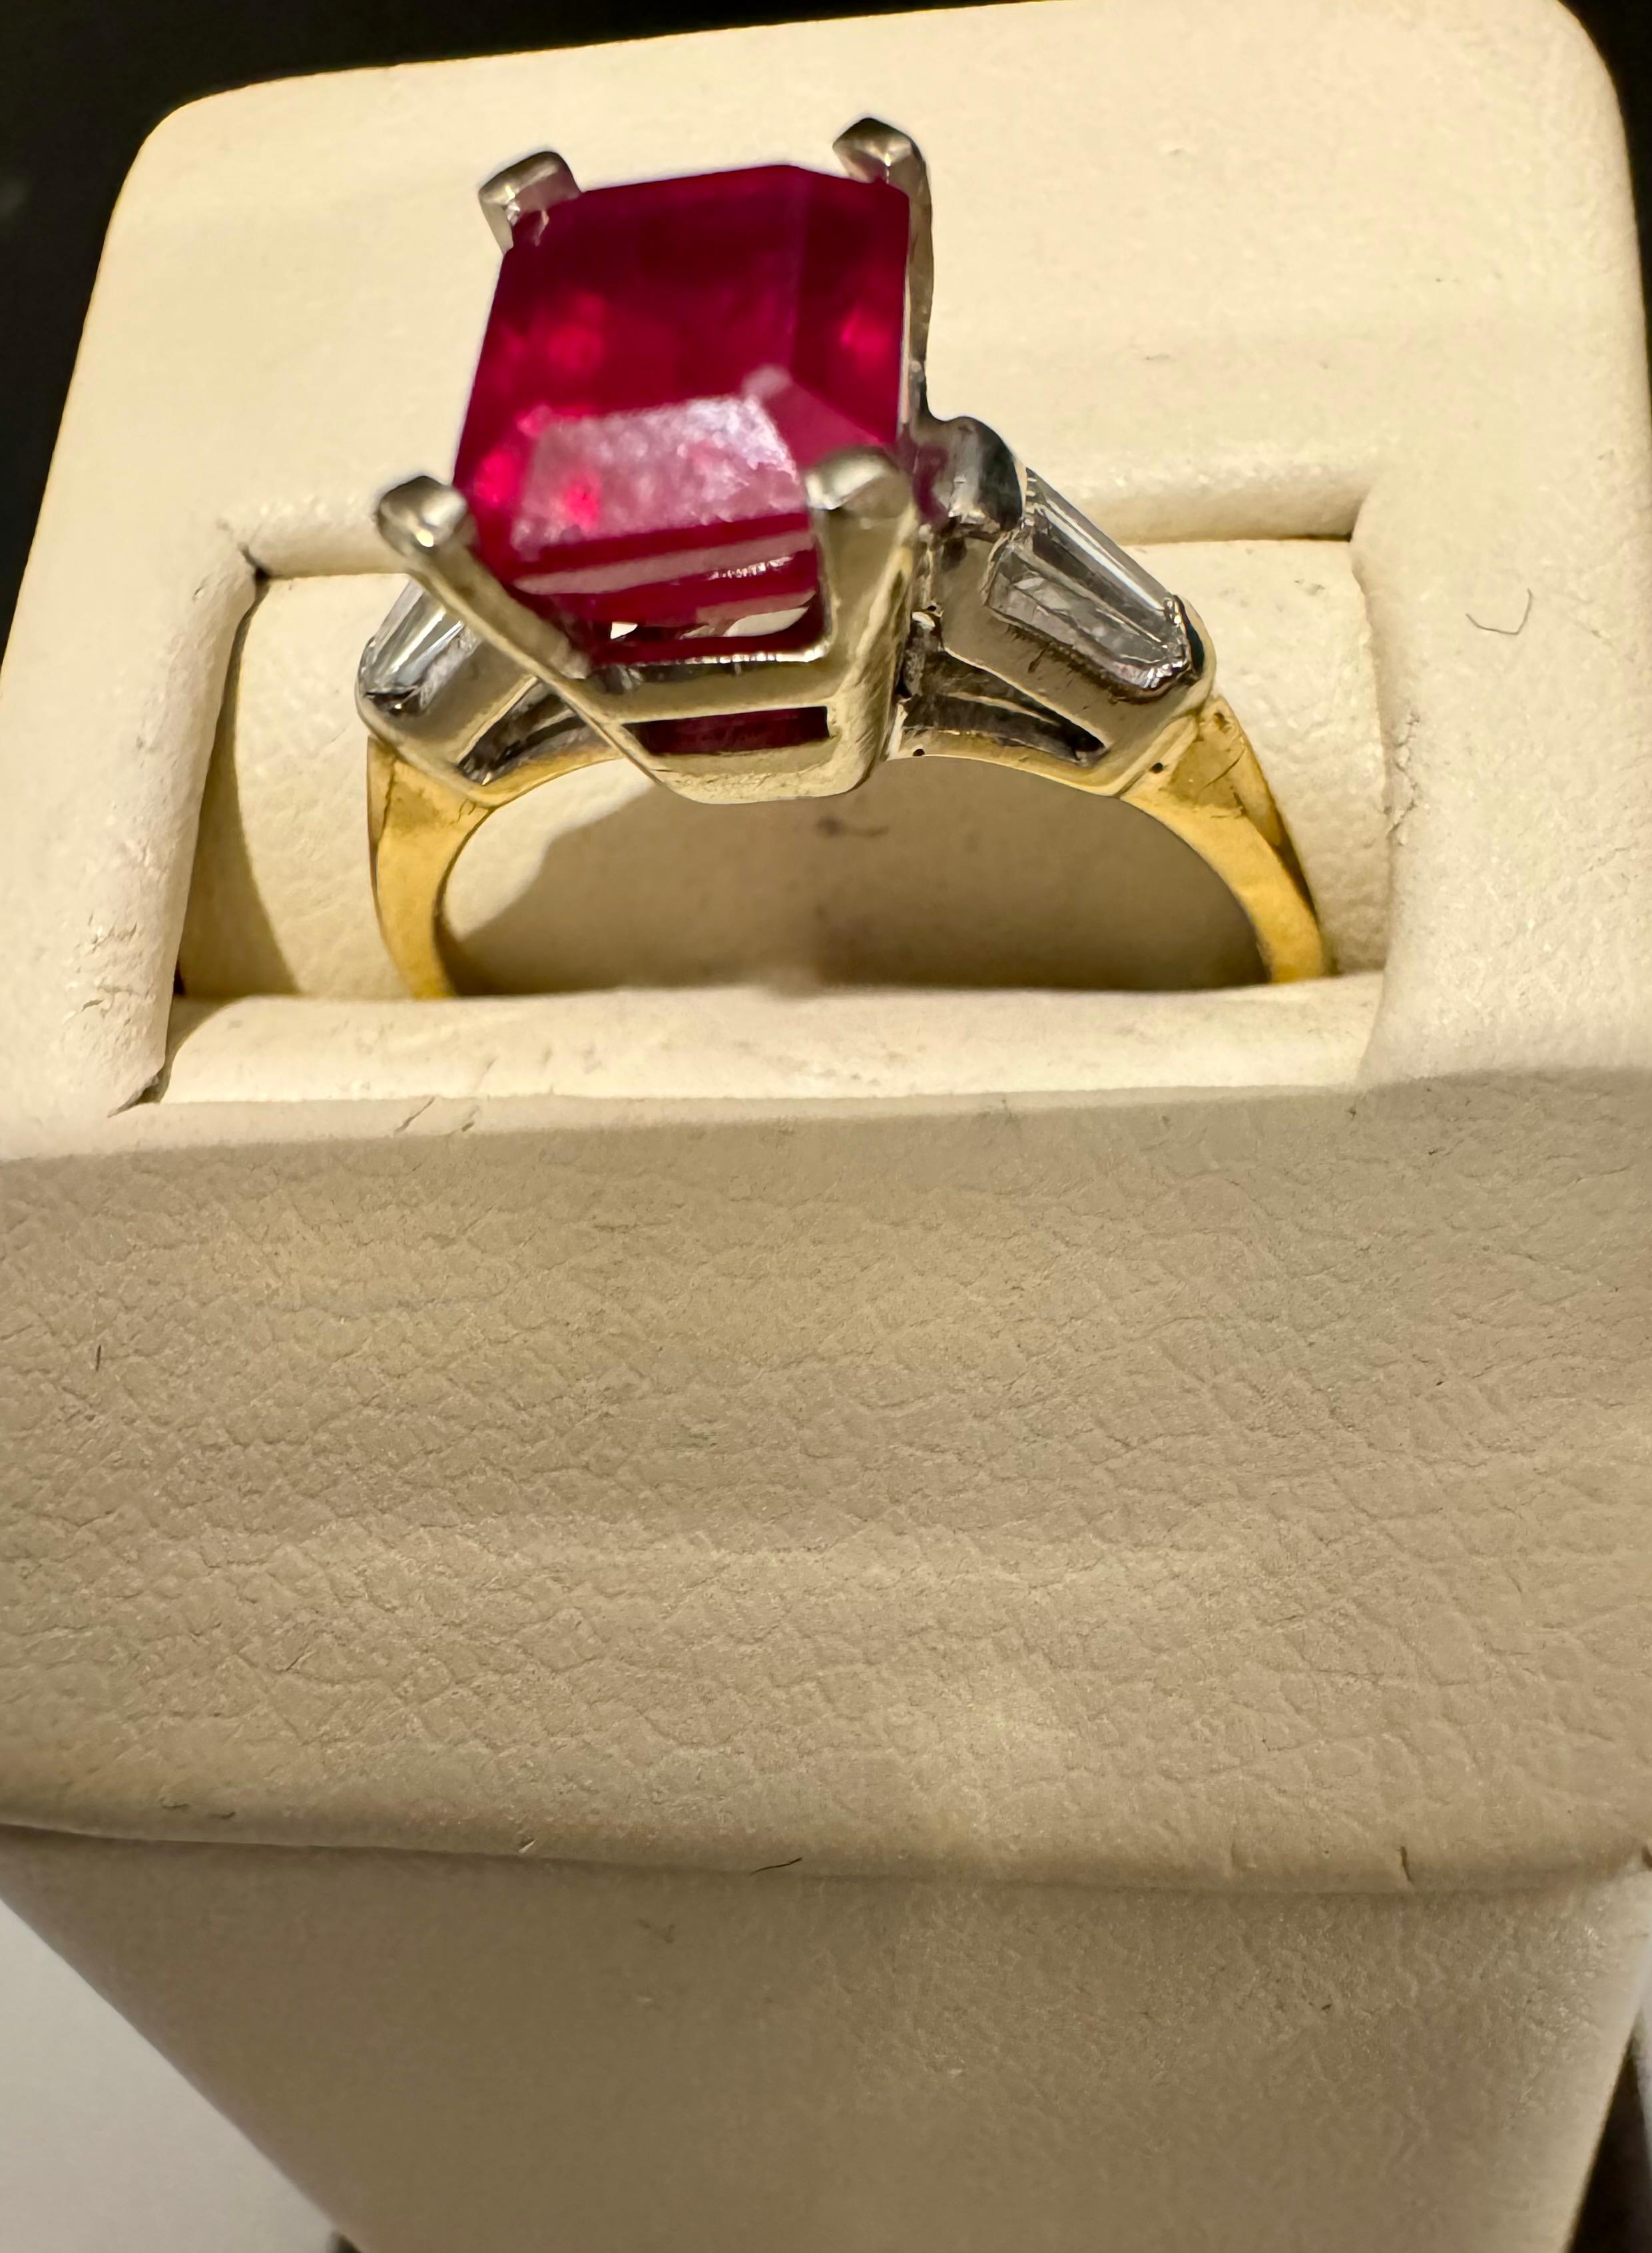 2.5 Ct Emerald Cut Treated Ruby & 0.15 ct Diamond Ring 14 Kt White Gold Size 5
Introducing a truly stunning piece, behold the 2.5 Carat Emerald cut Treated Ruby & 0.15 ct Diamond Ring in exquisite 14 Karat White Gold. This ring boasts a magnificent